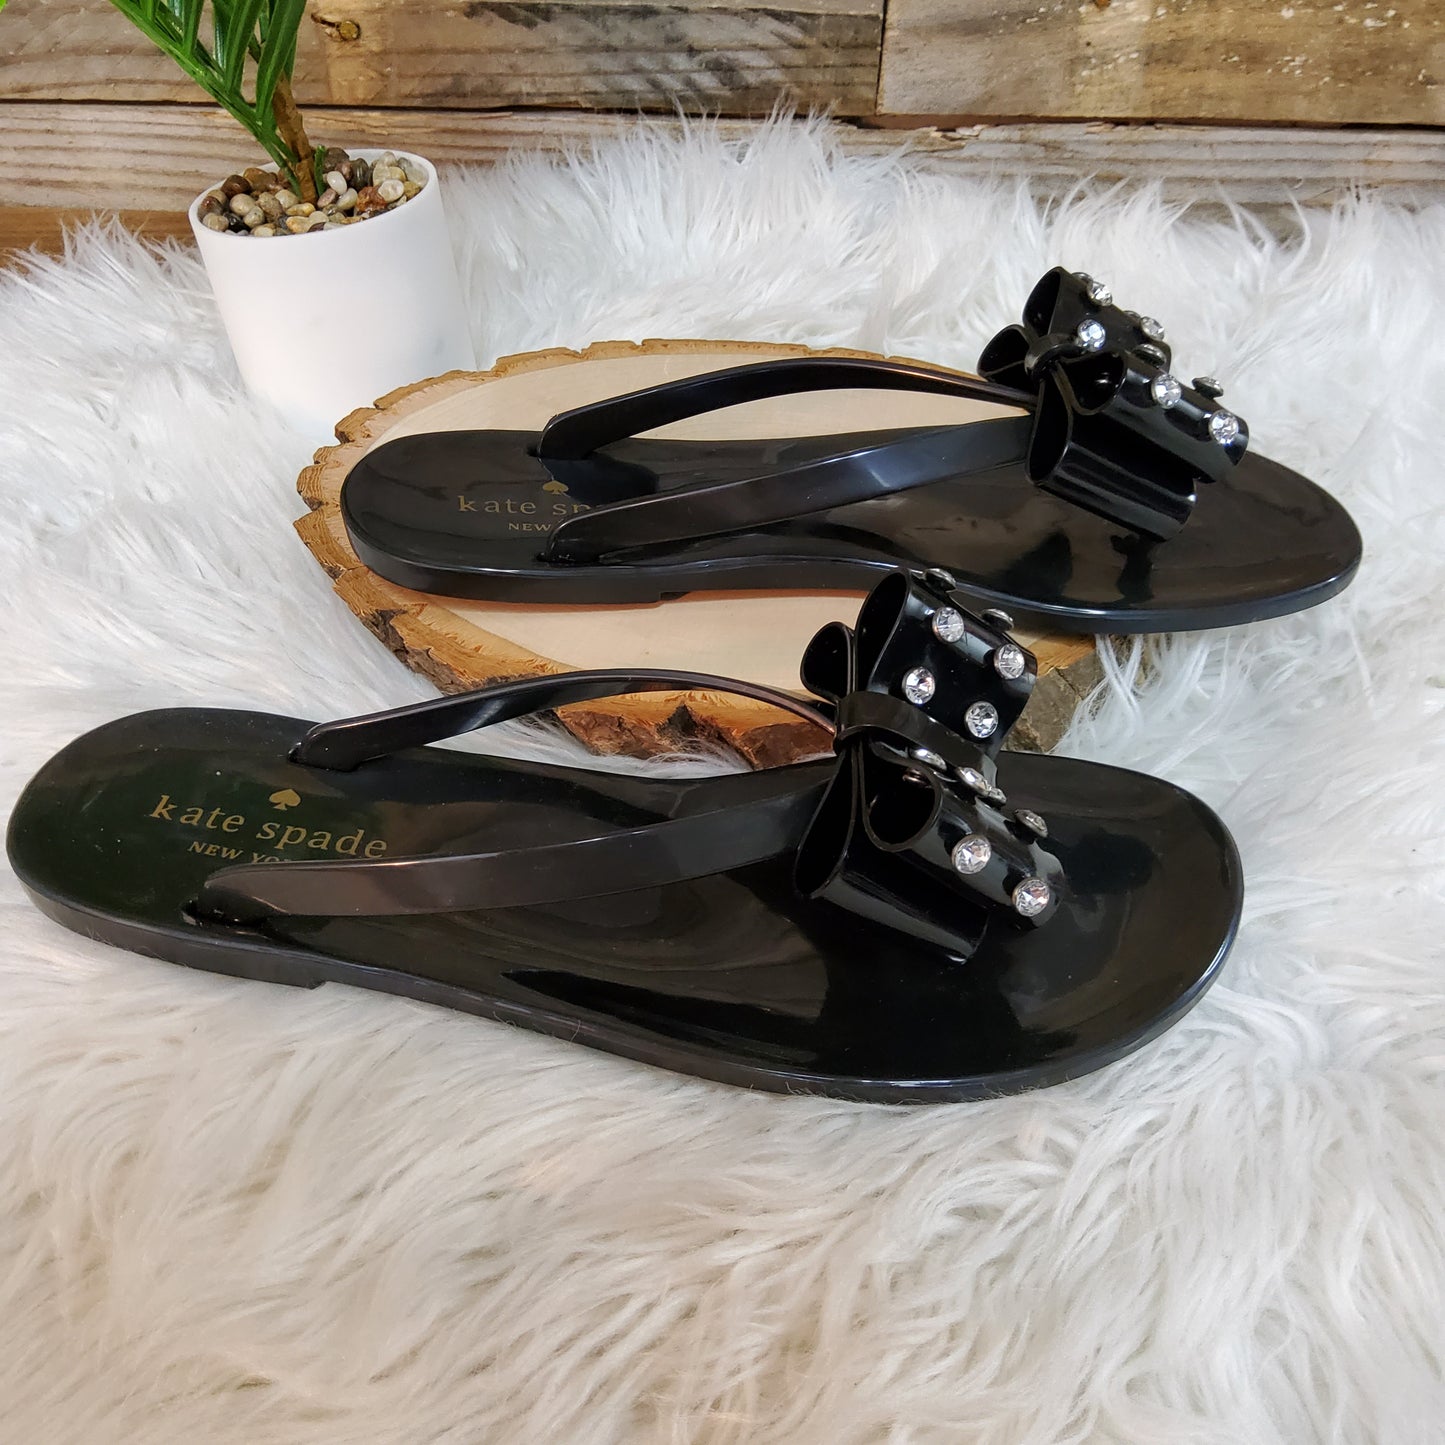 Kate Spade Bow Tie Jelly Sandals Sz 8